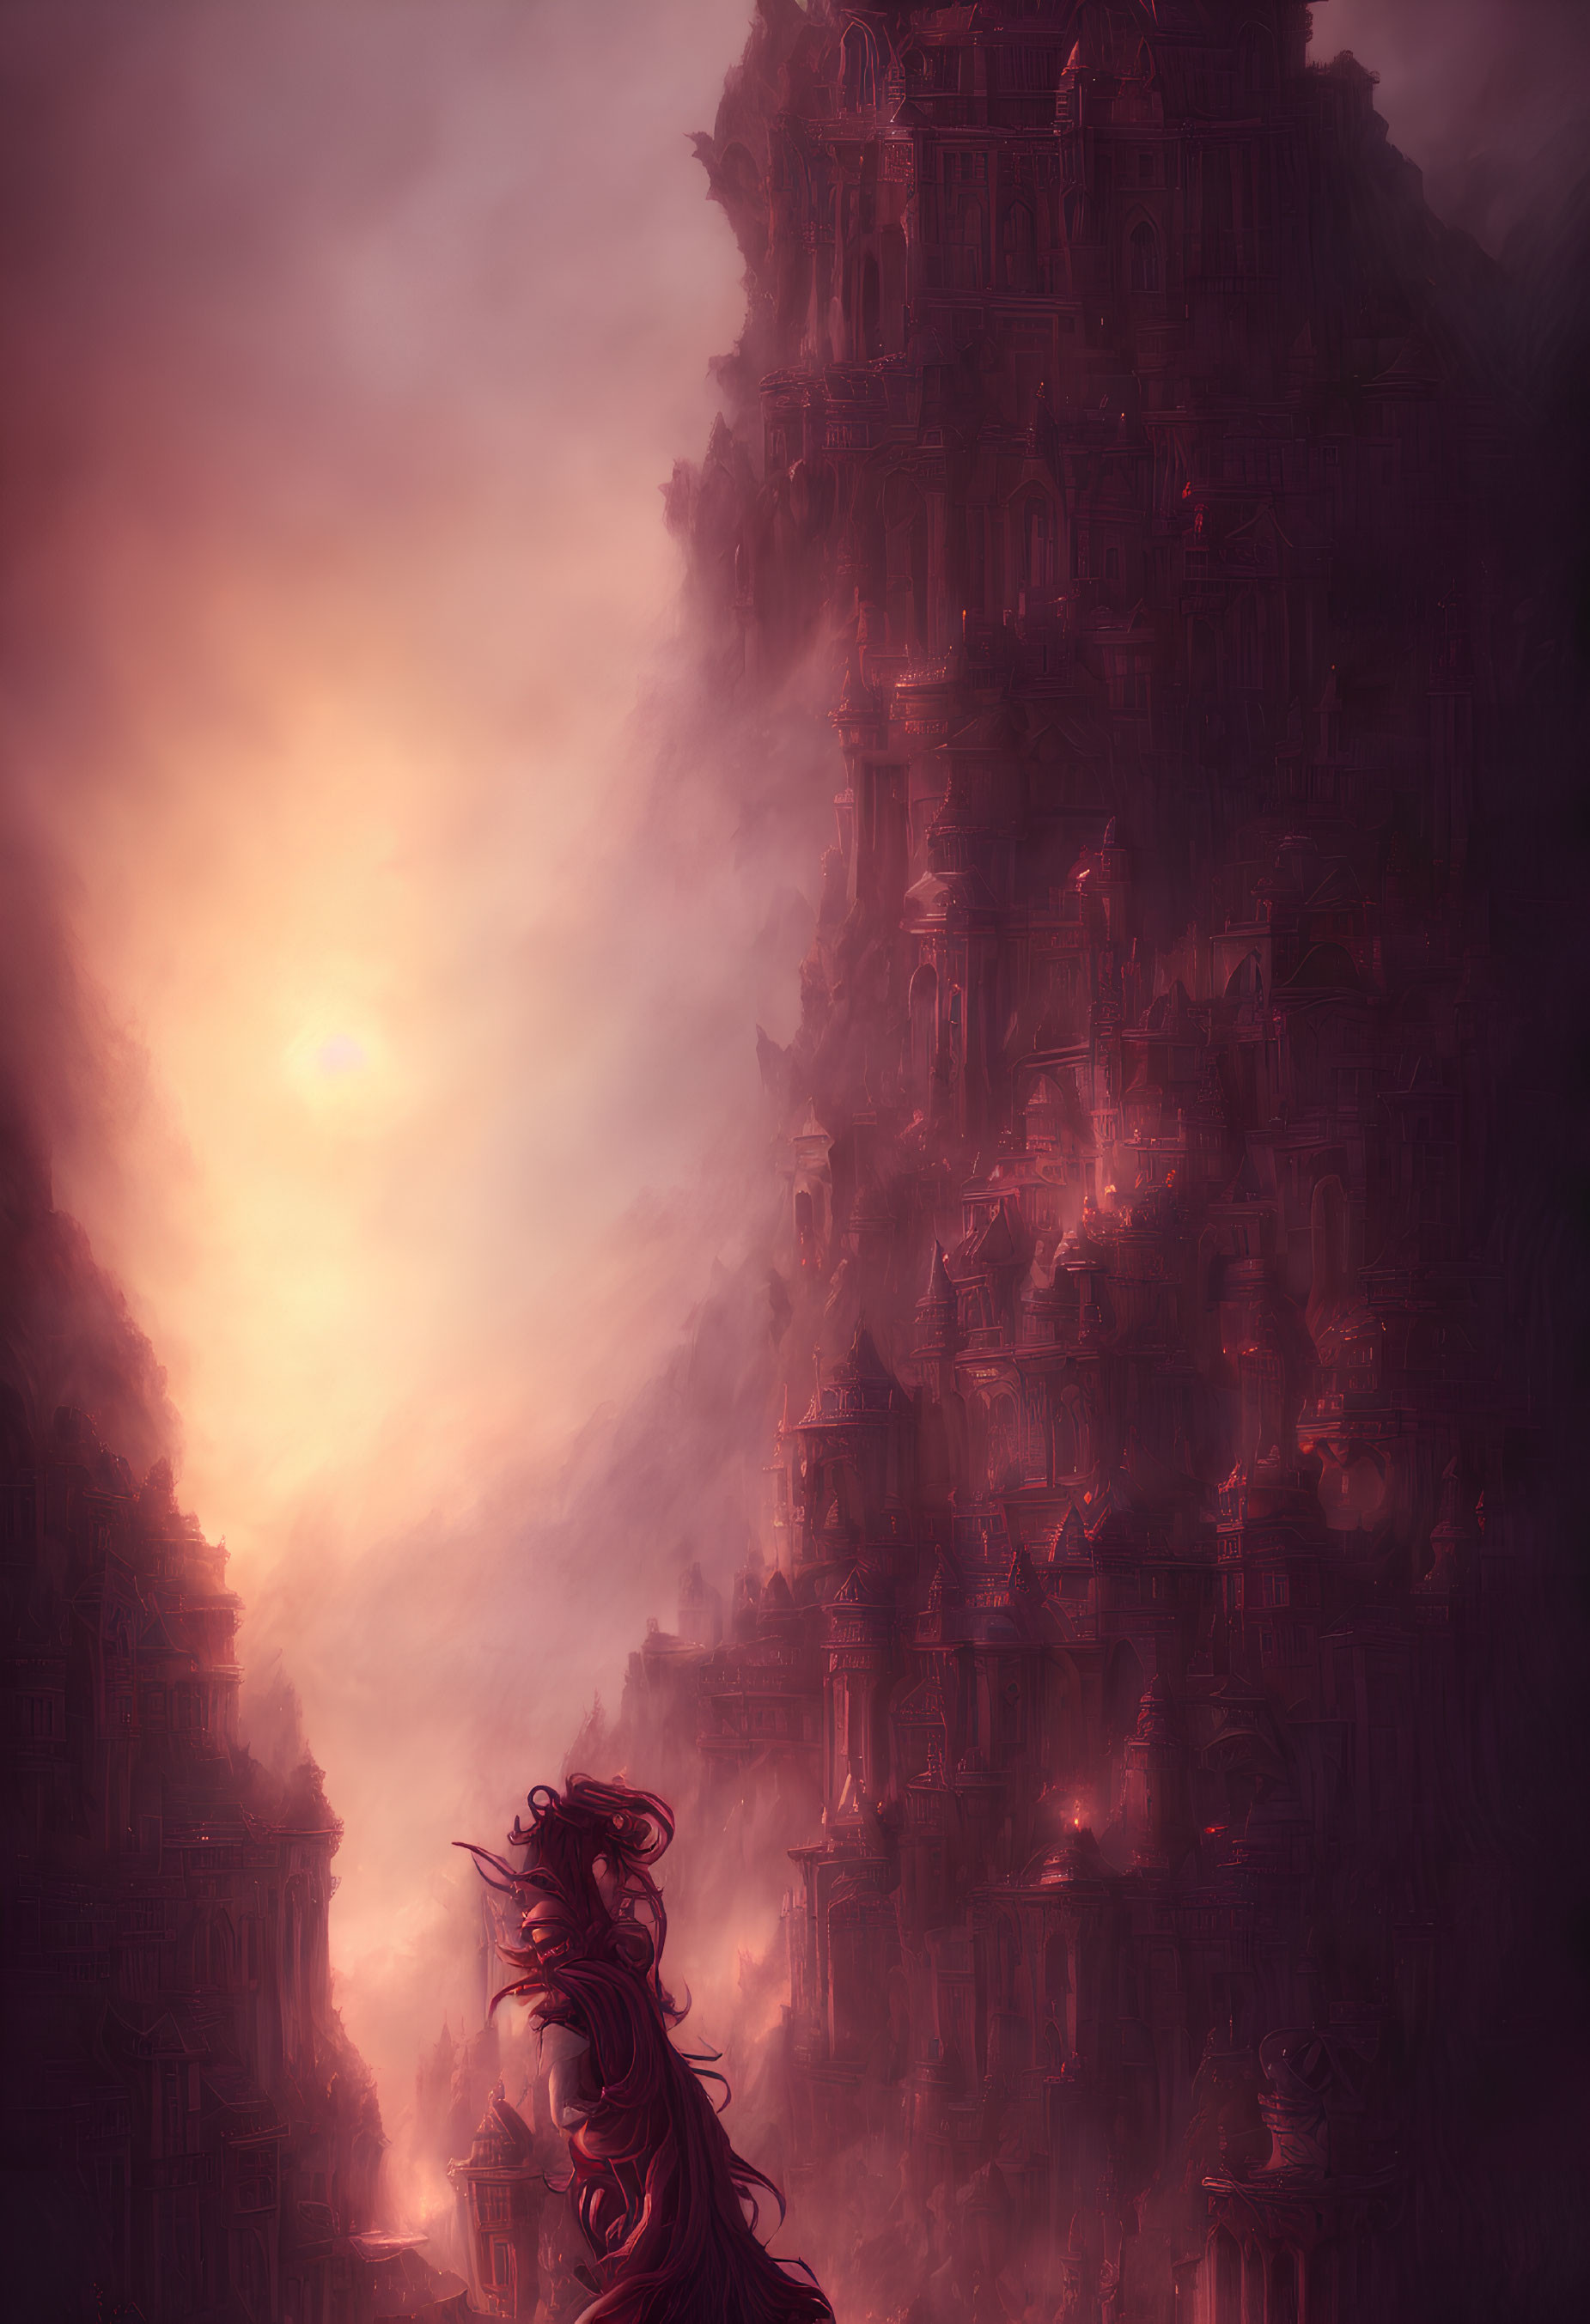 Gothic structure in mist with lone figure and glowing light